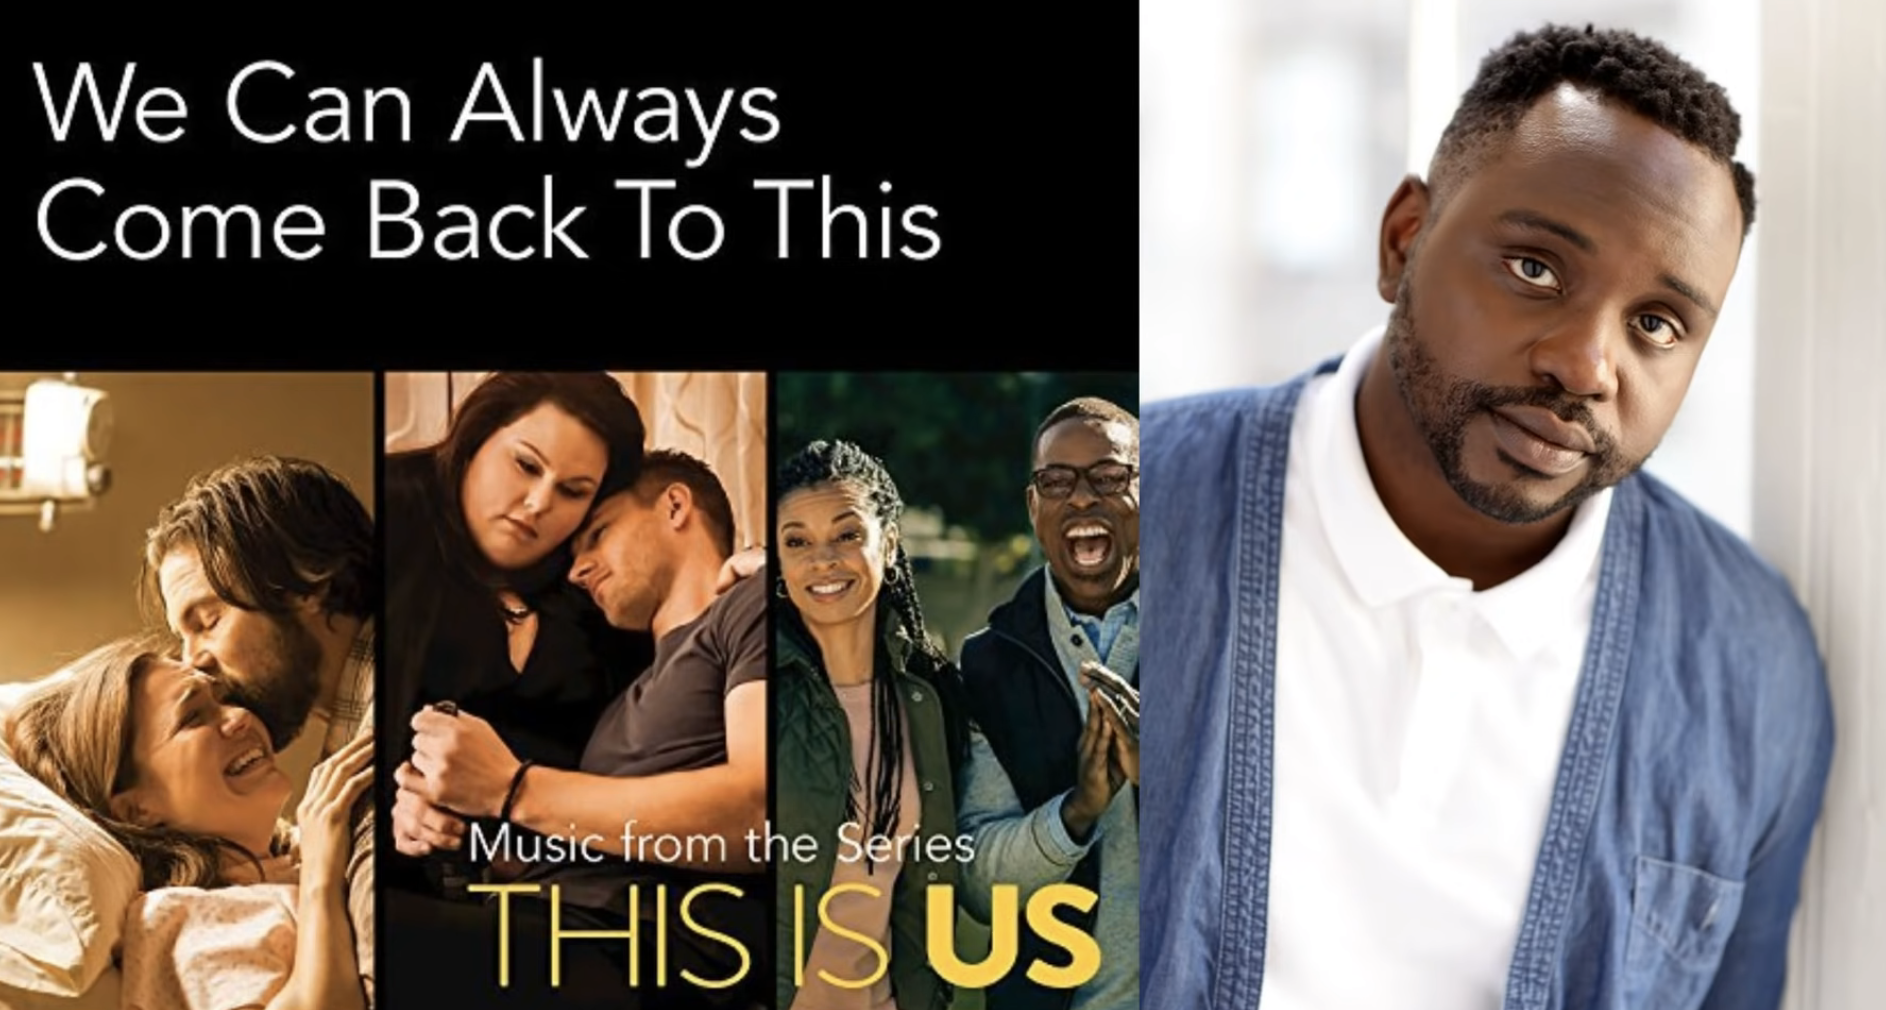 Music from "This is us" - We can always come back to this.